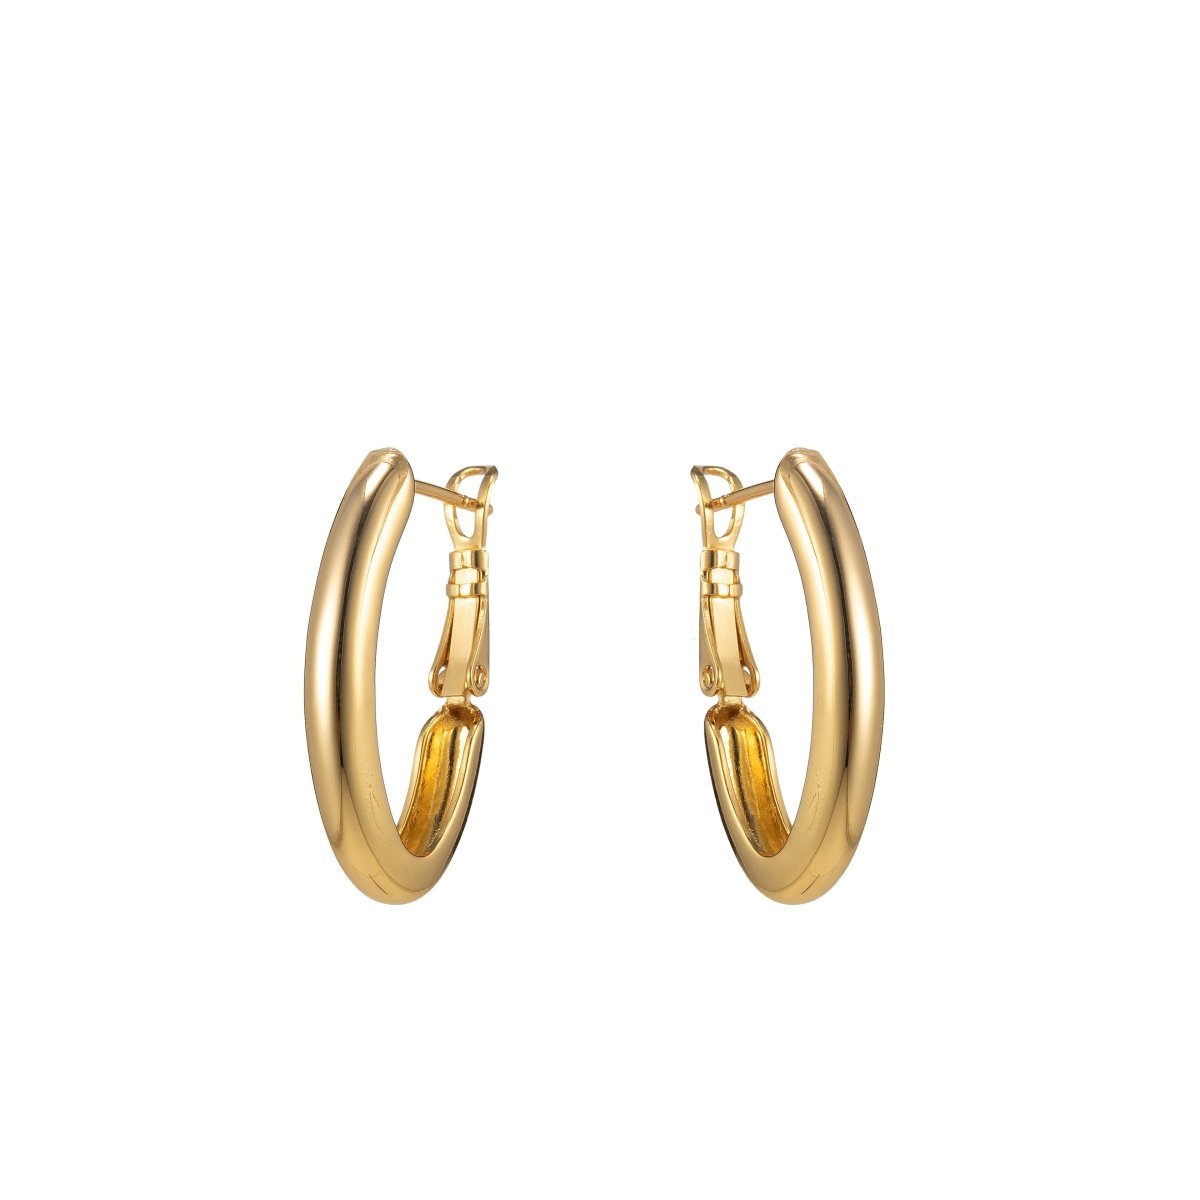 Dainty Hoop Earring Gold Filled 15mm Thin Hoops lever back earring P-183 P-184 - DLUXCA